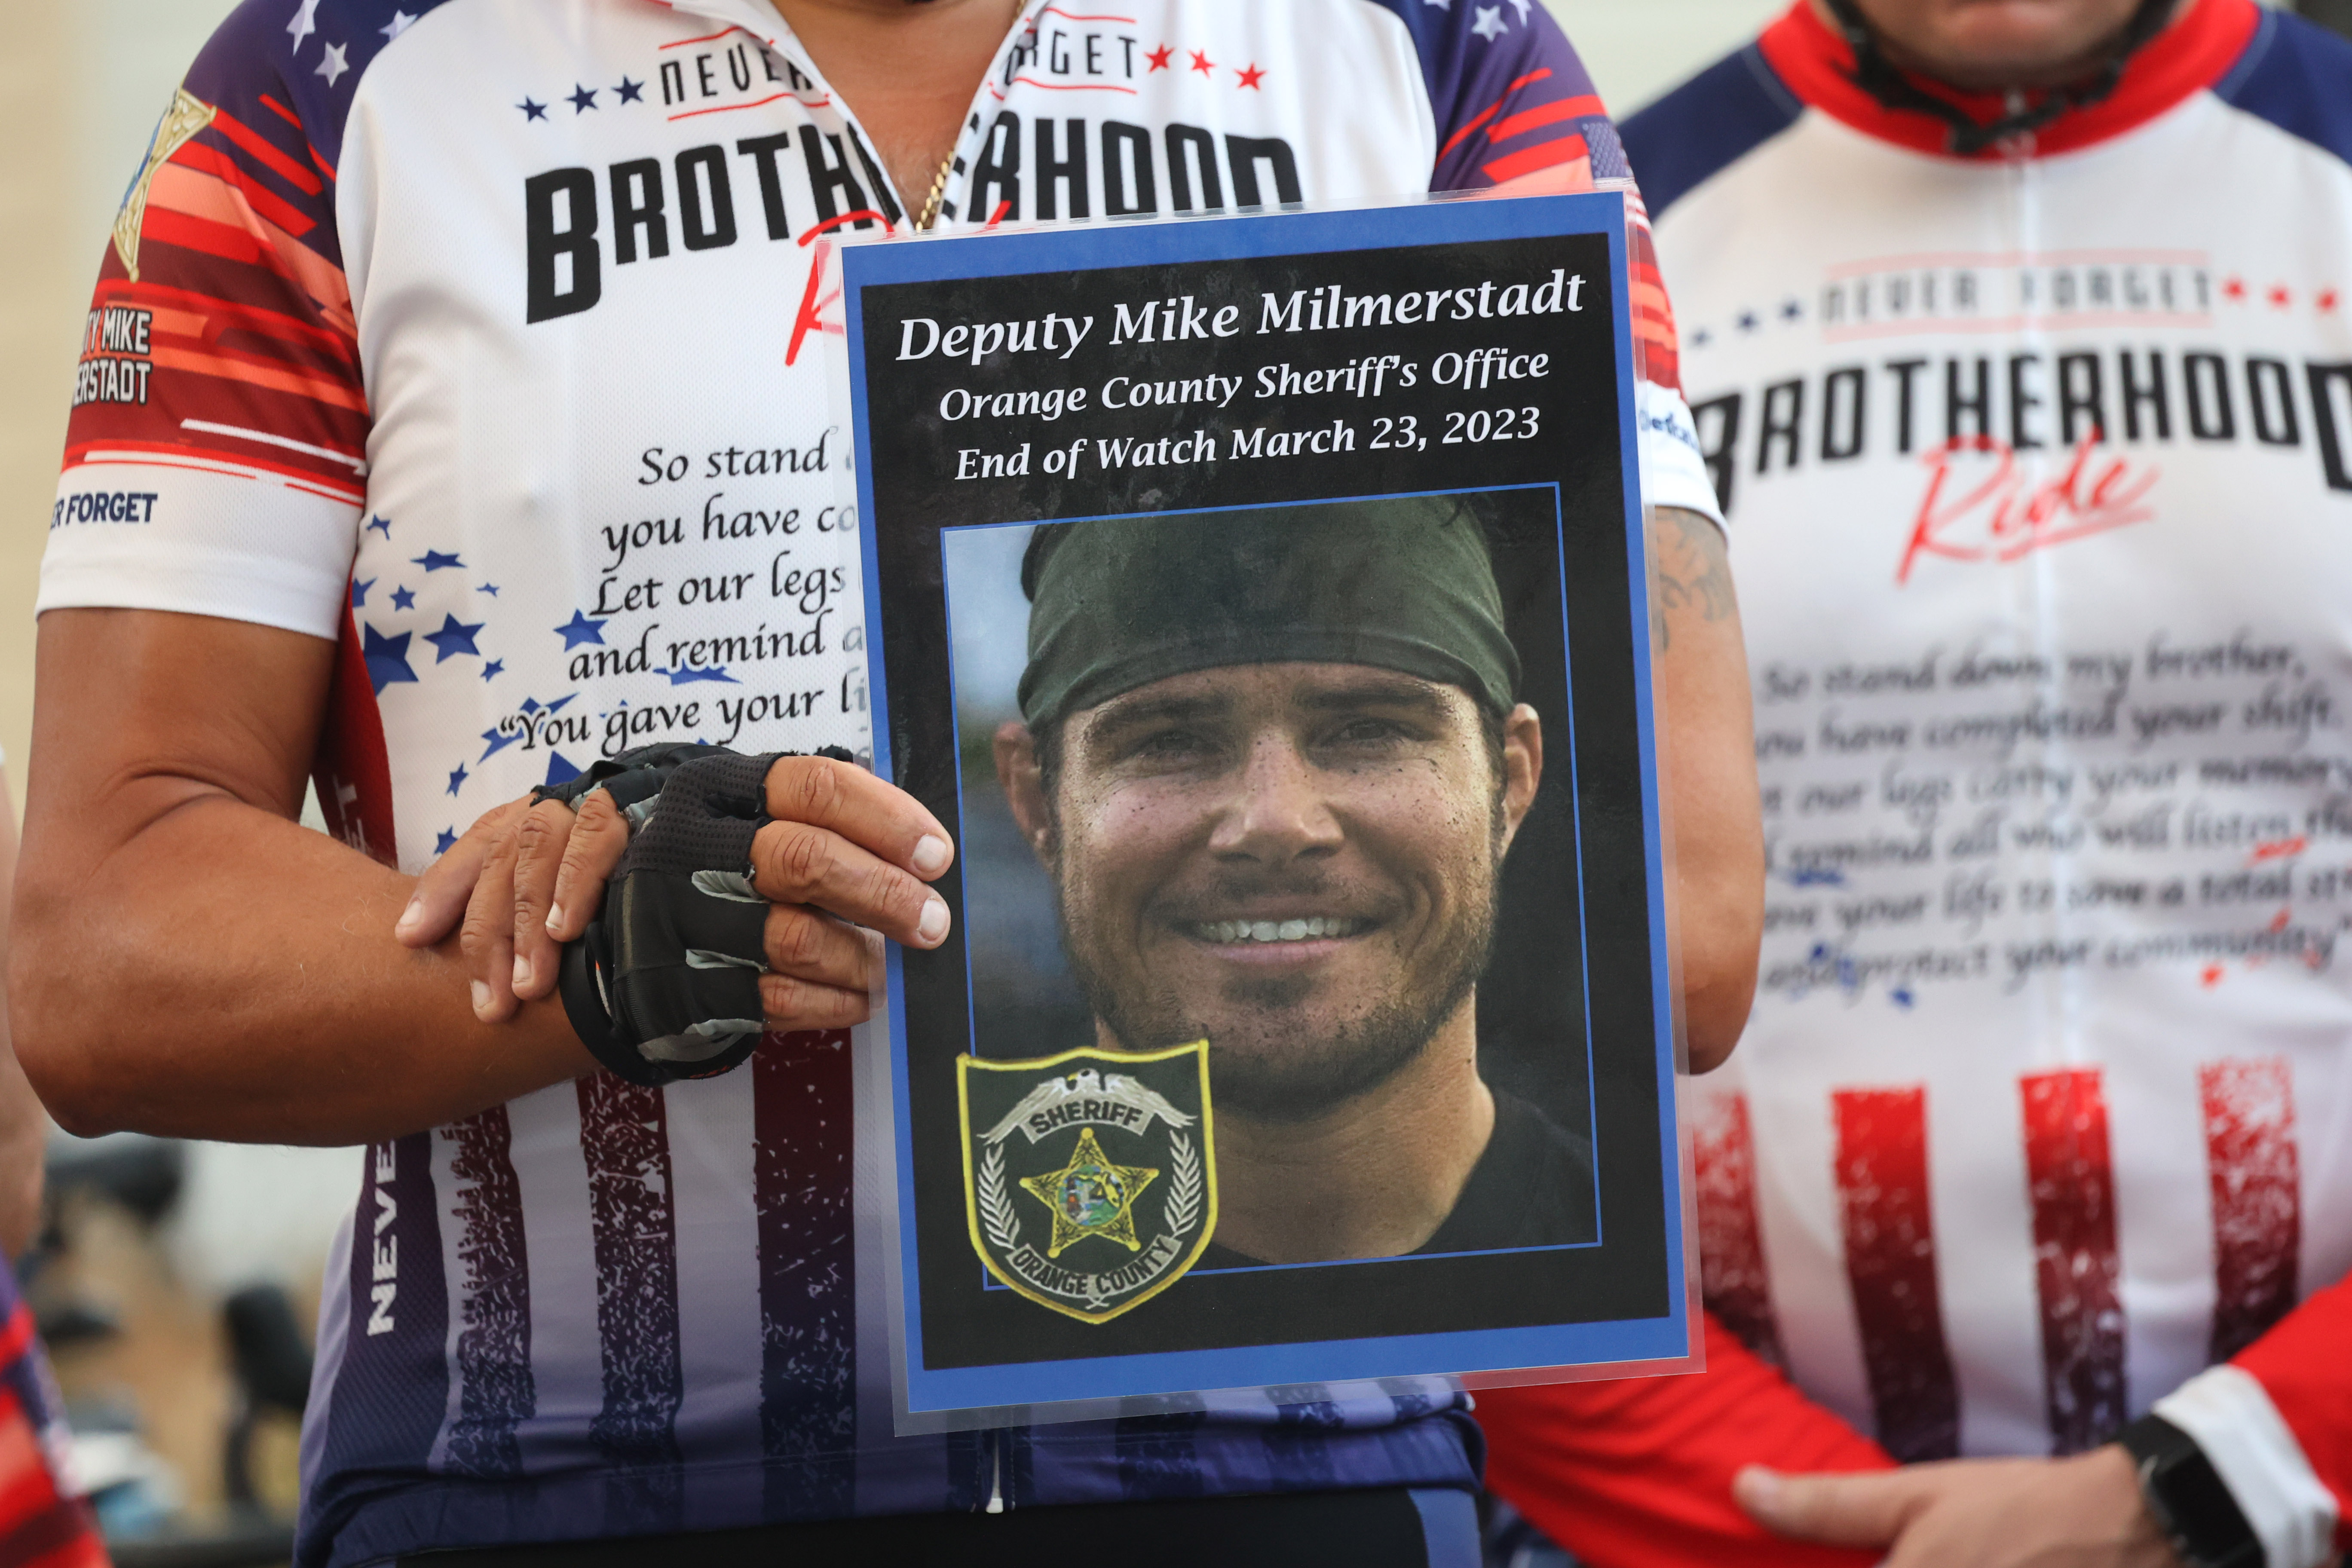 Remembrance poster for Orange county Deputy Mike Milmerstadt, before the Brotherhood Ride departs the Elks Lodge 1079, on their way to Cocoa Beach, on Tuesday, October 31, 2023. The ride is dedicated to the 28 Florida Fallen First Responders who died in the line of duty in 2022 while protecting their communities. They started in Naples and will end their 9-day ride through Florida in Miami.(Ricardo Ramirez Buxeda/ Orlando Sentinel)